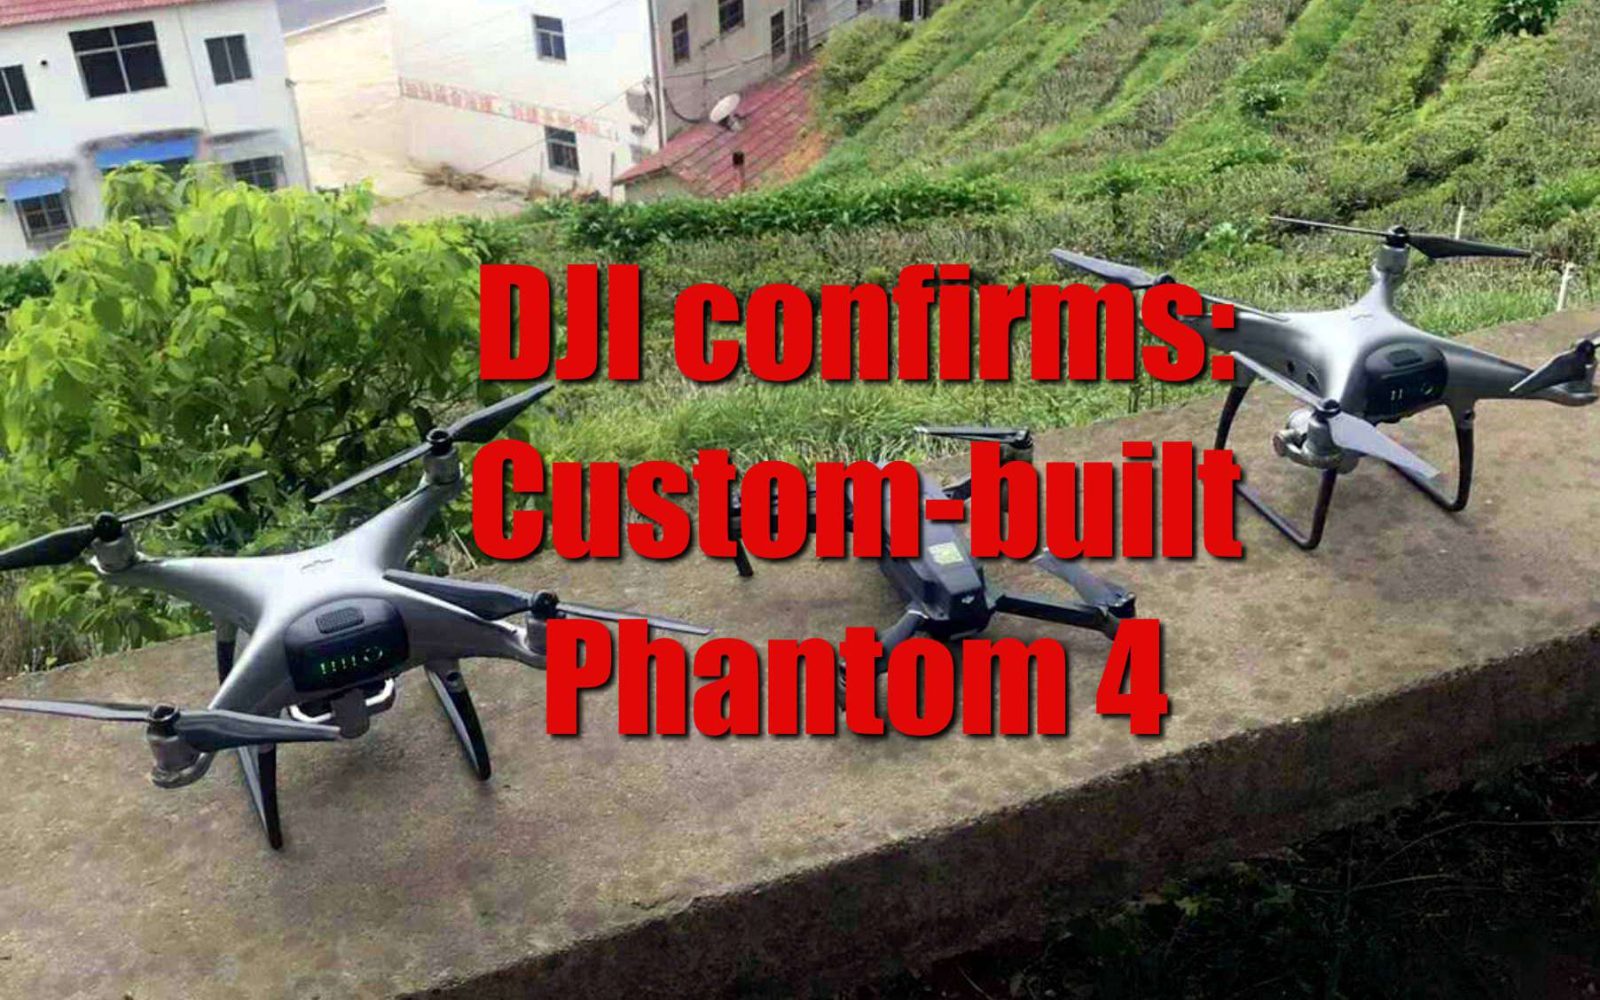 DJI confirms: these photos do not show a new Phantom 5 drone with an interchangeable lens system